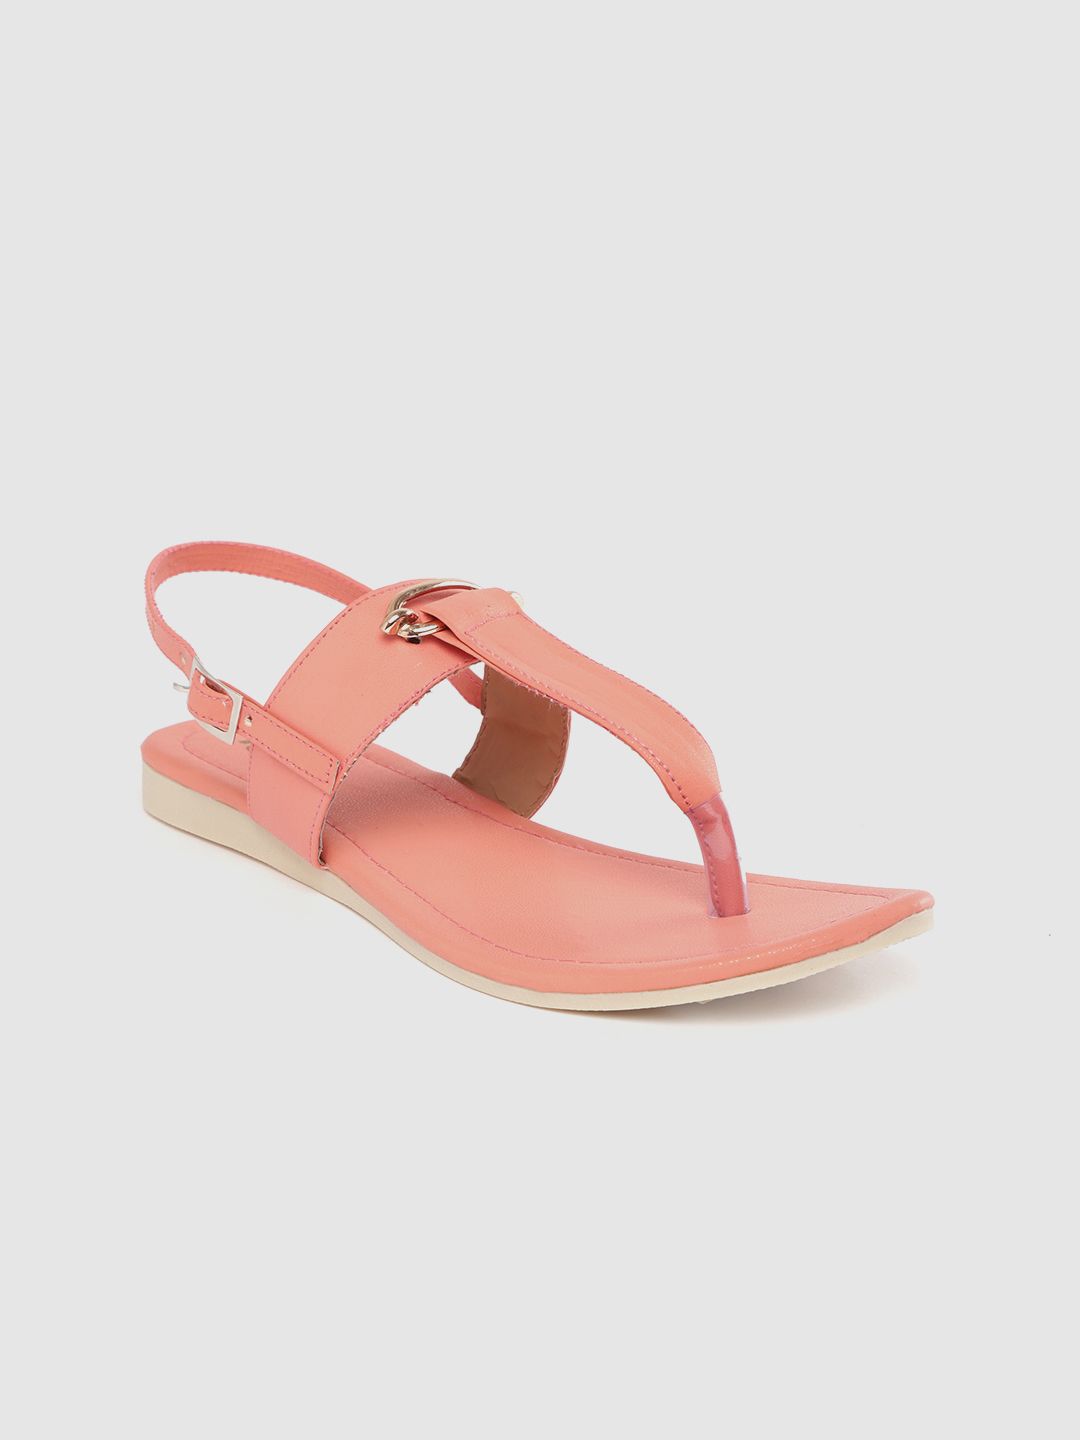 Padvesh Women Peach-Coloured Solid T-Strap Flats with Metallic Detail Price in India